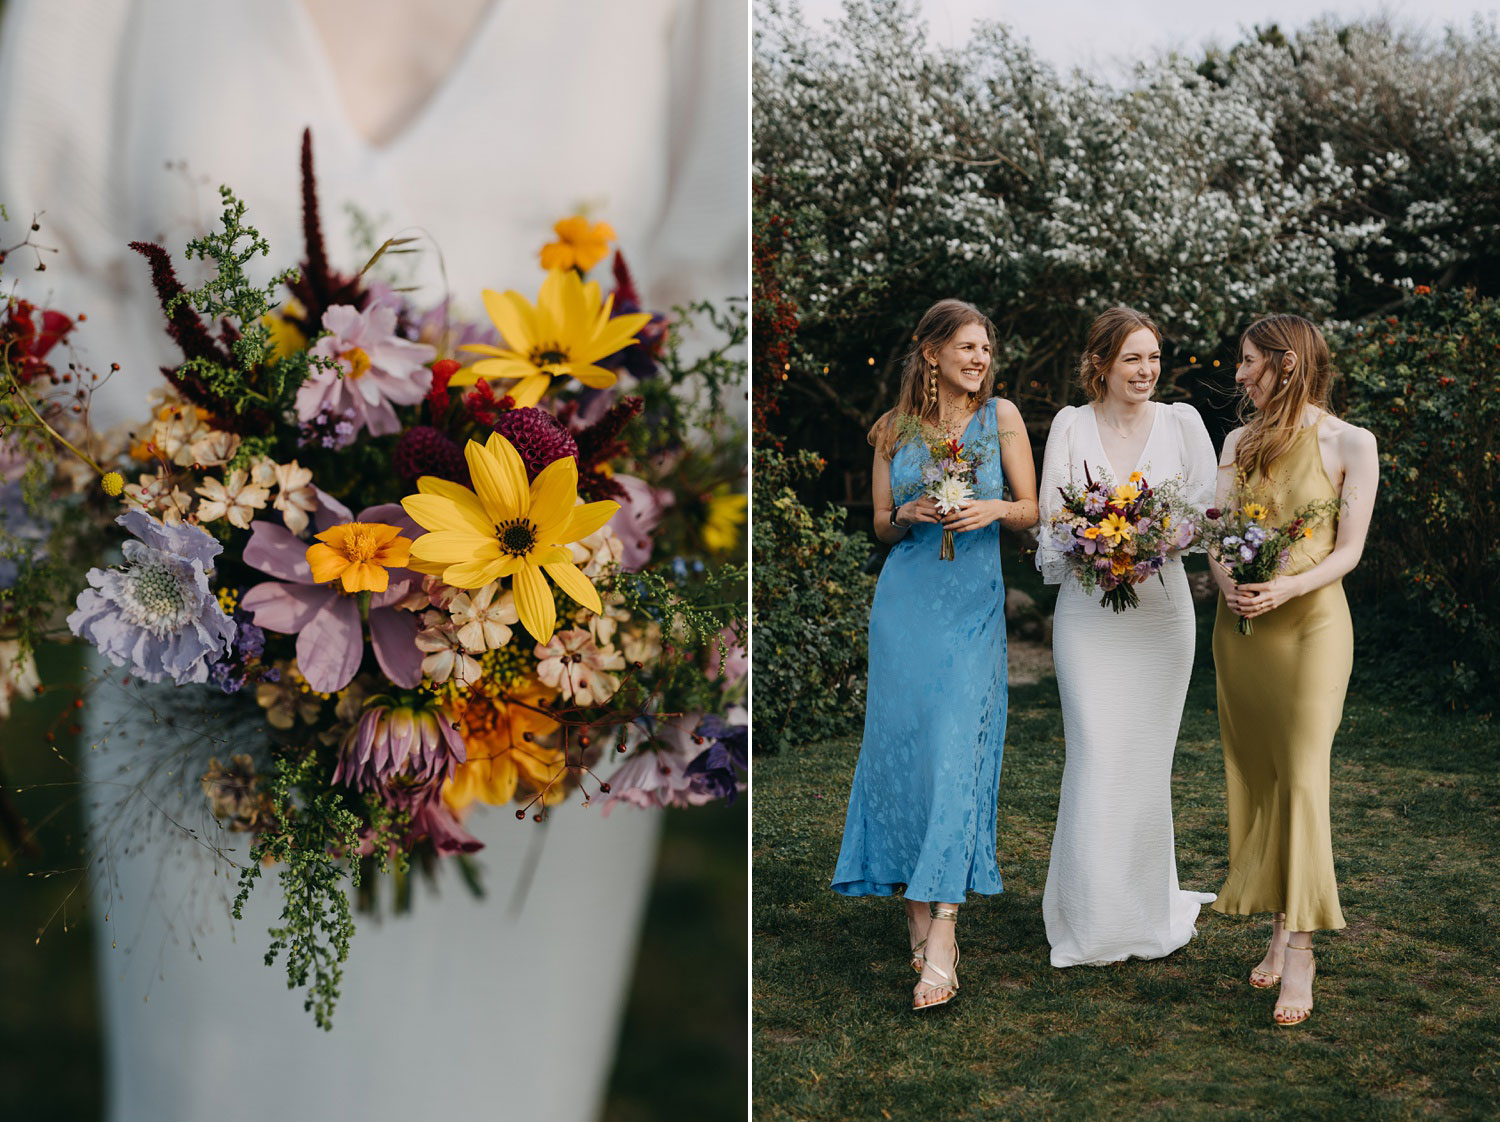 beautiful wild flowers wedding bouquet and bride and bridesmaids walking together